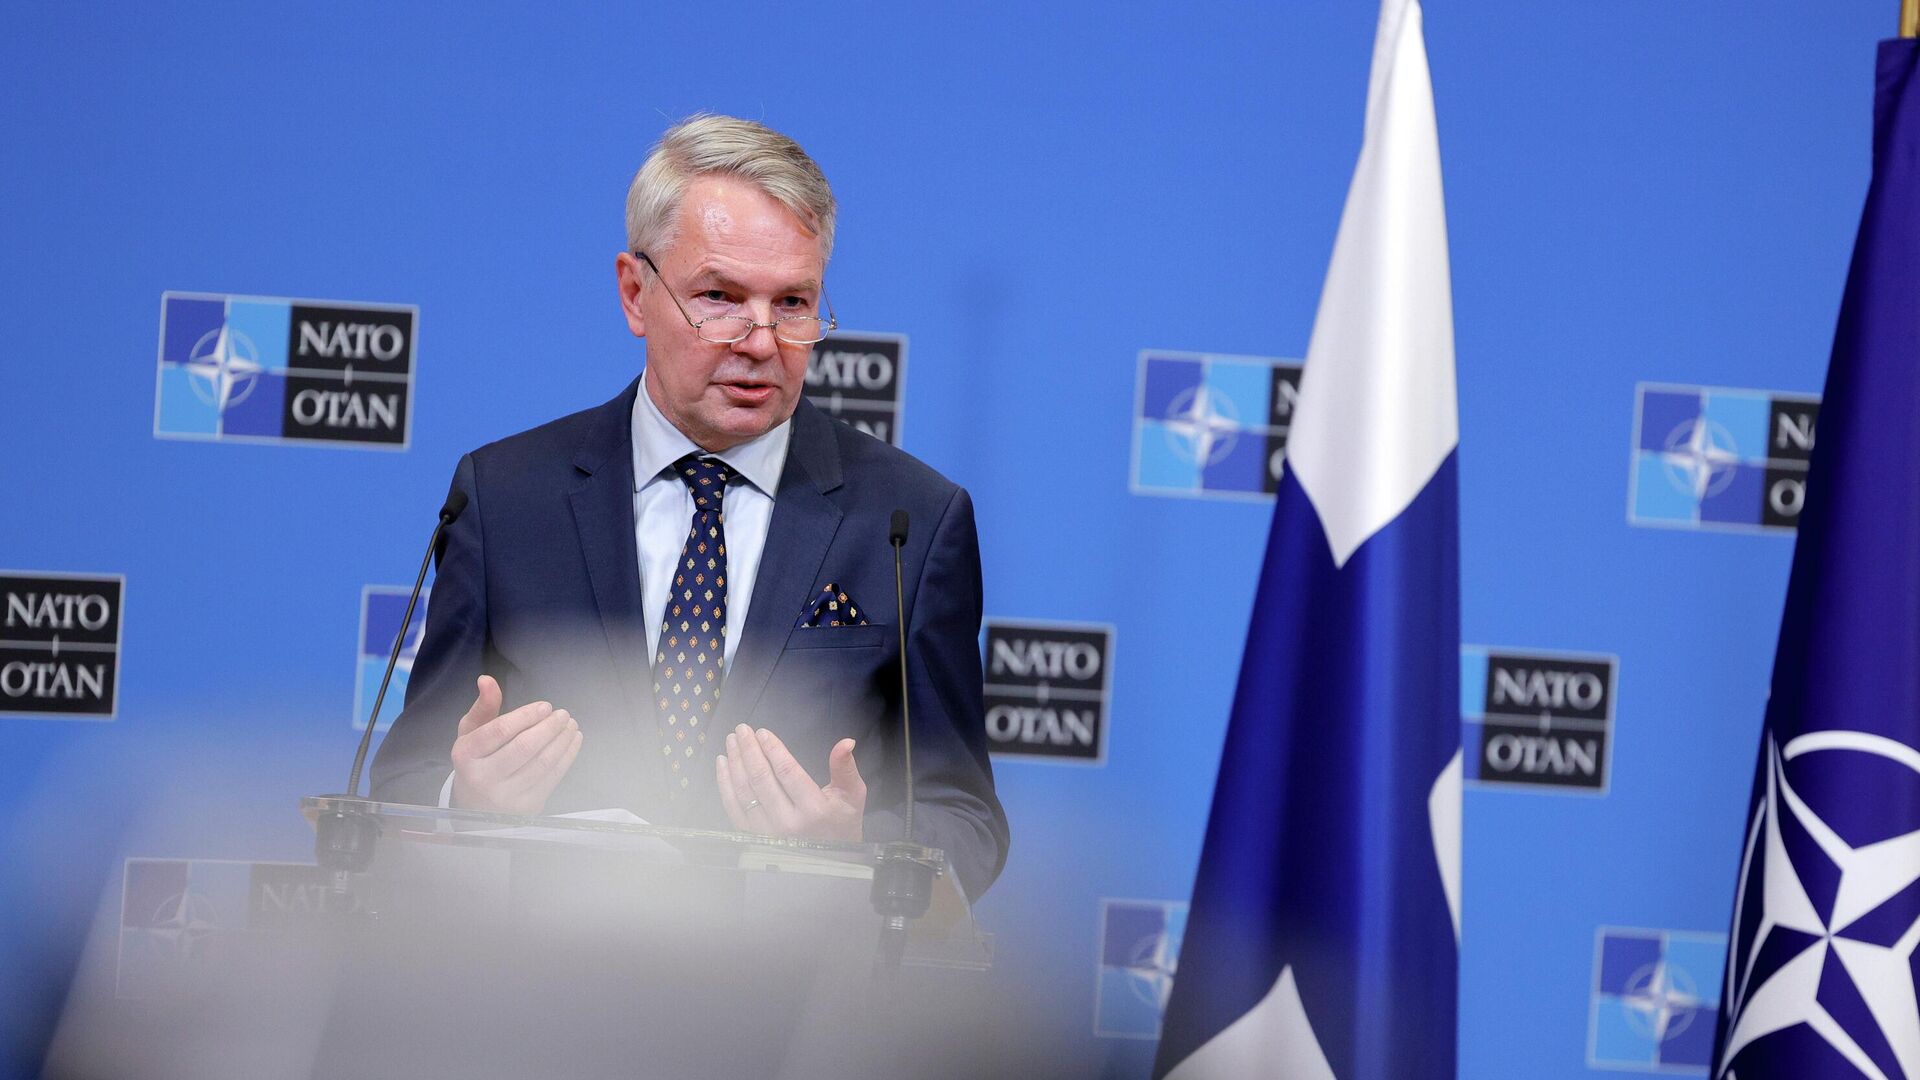 Finland's Foreign Minister Pekka Haavisto speaks during a media conference at NATO headquarters in Brussels, Monday, Jan. 24, 2022. - Sputnik International, 1920, 14.05.2022